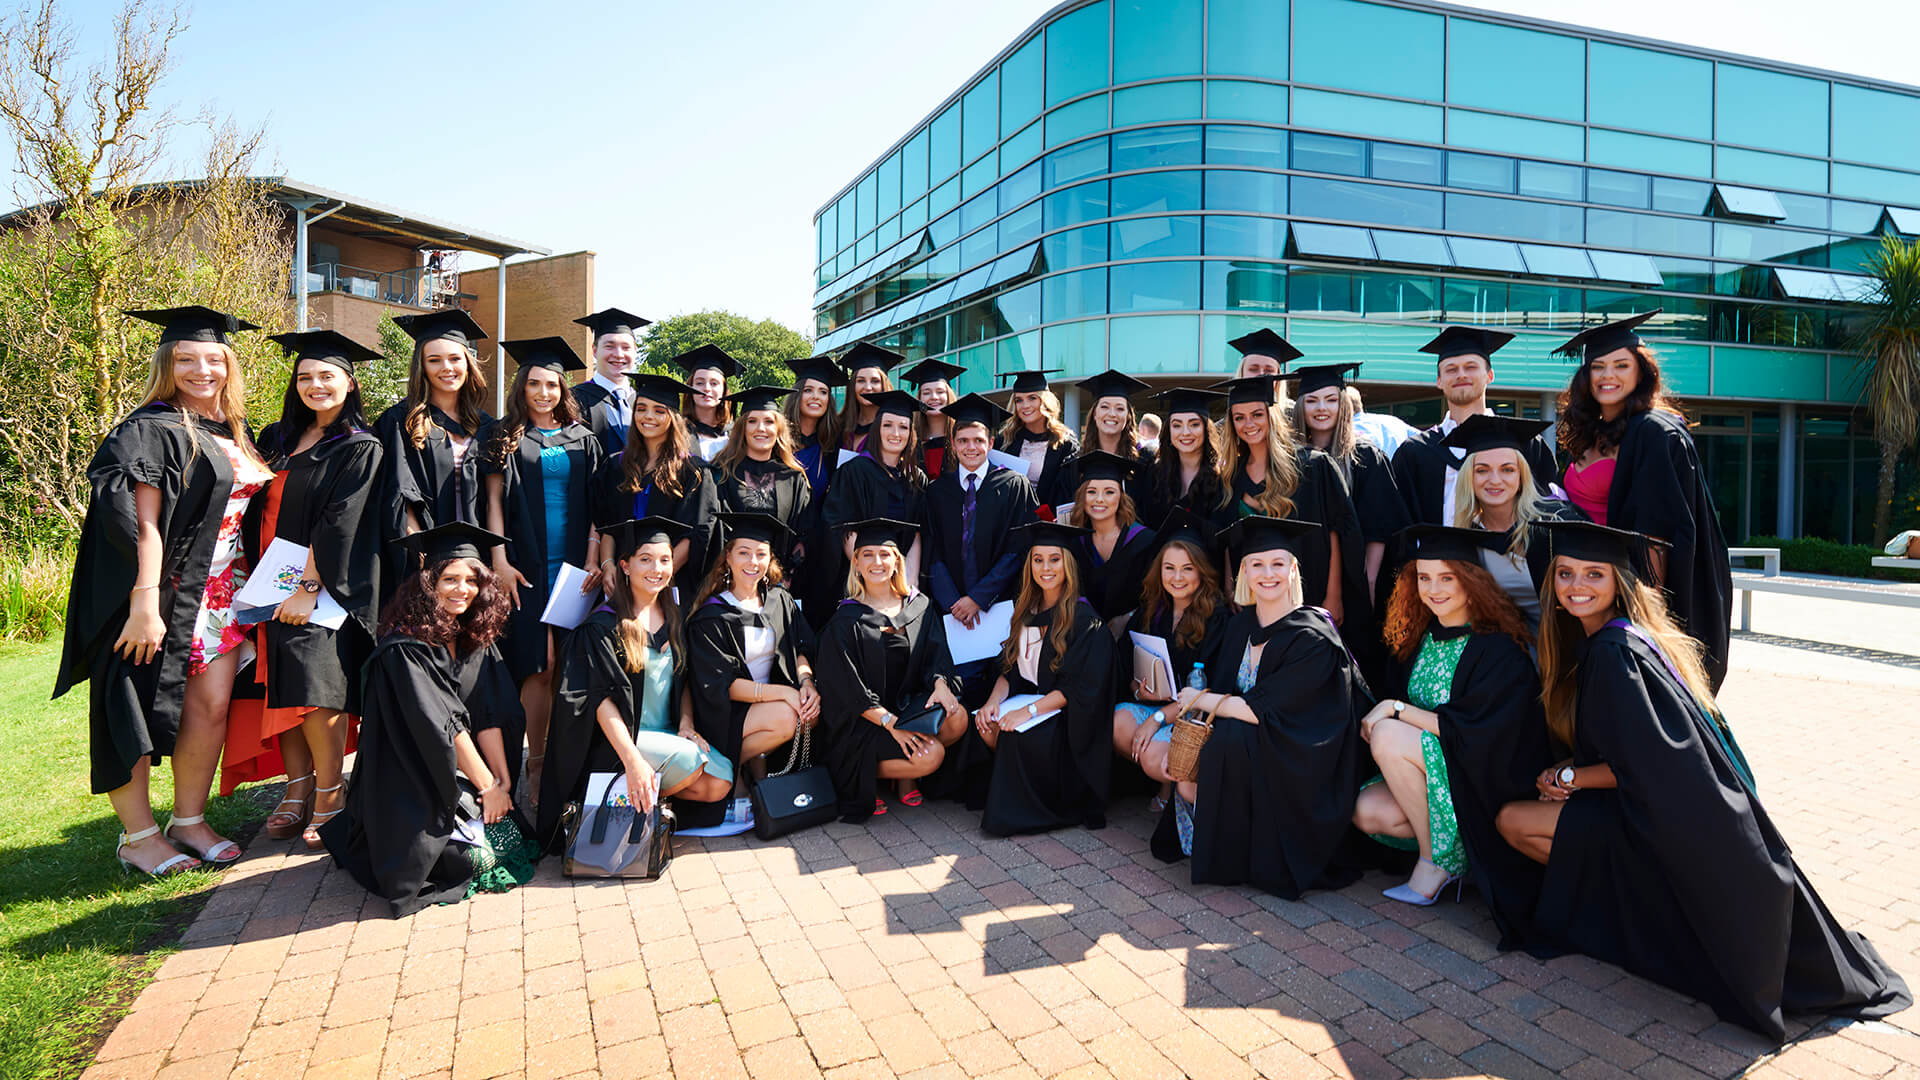 A large group of graduates celebrate their success on campus.